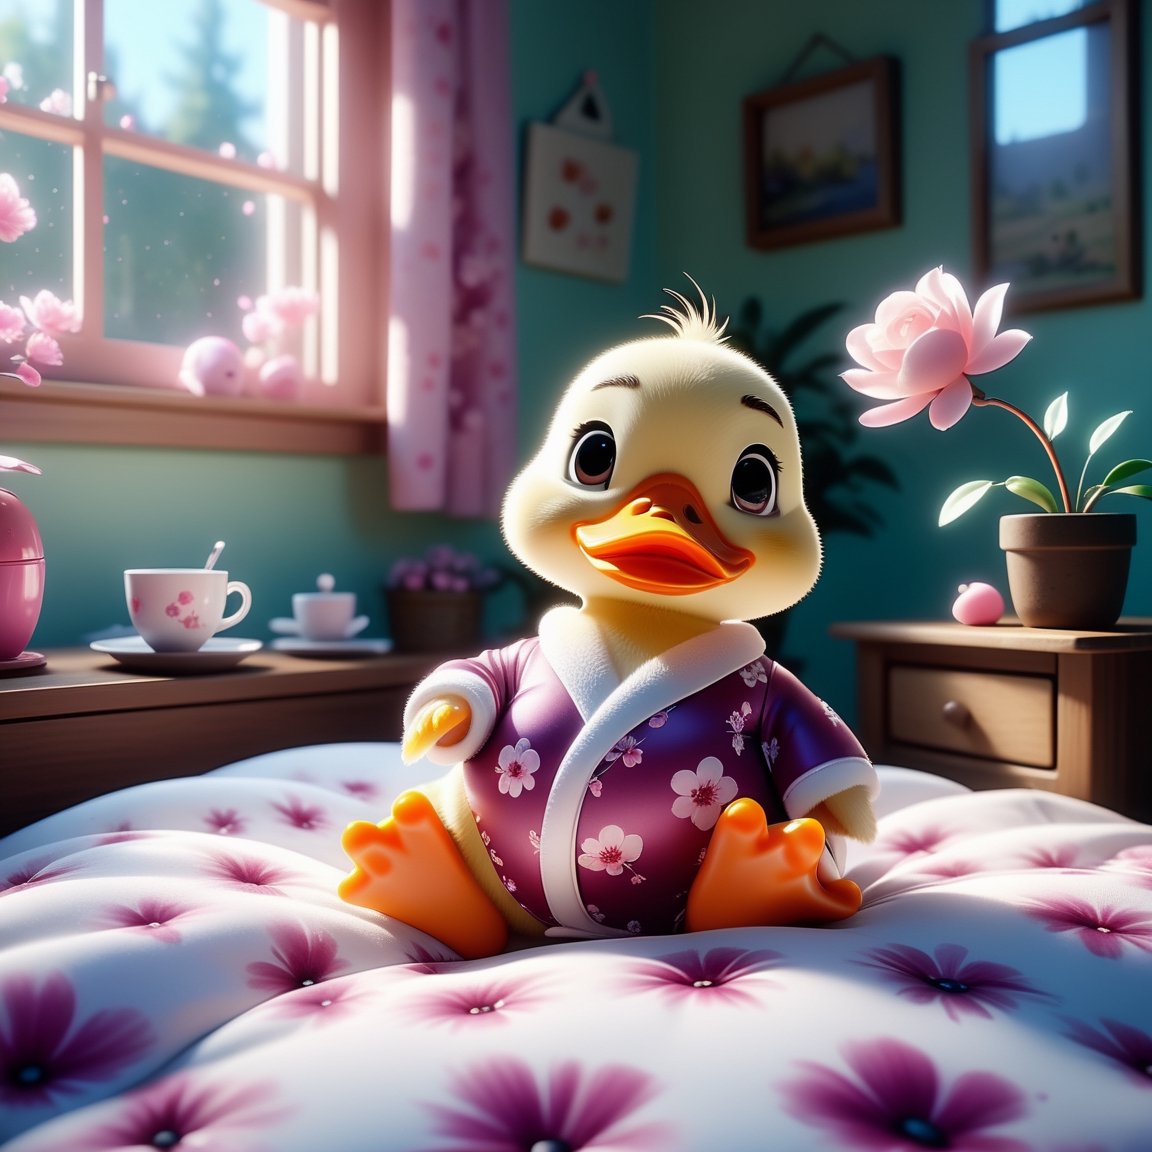 Pixar and Disney animation movie scene style, render style anime style, plum blooming, Cute chubby duck wearing pink and white pyjama, weaking up, lying on bed, Serene, Art Hoe, Detailed Painting, adorable and lovely, sleepy look, GoPro view, Blender rendering, Sharp, 